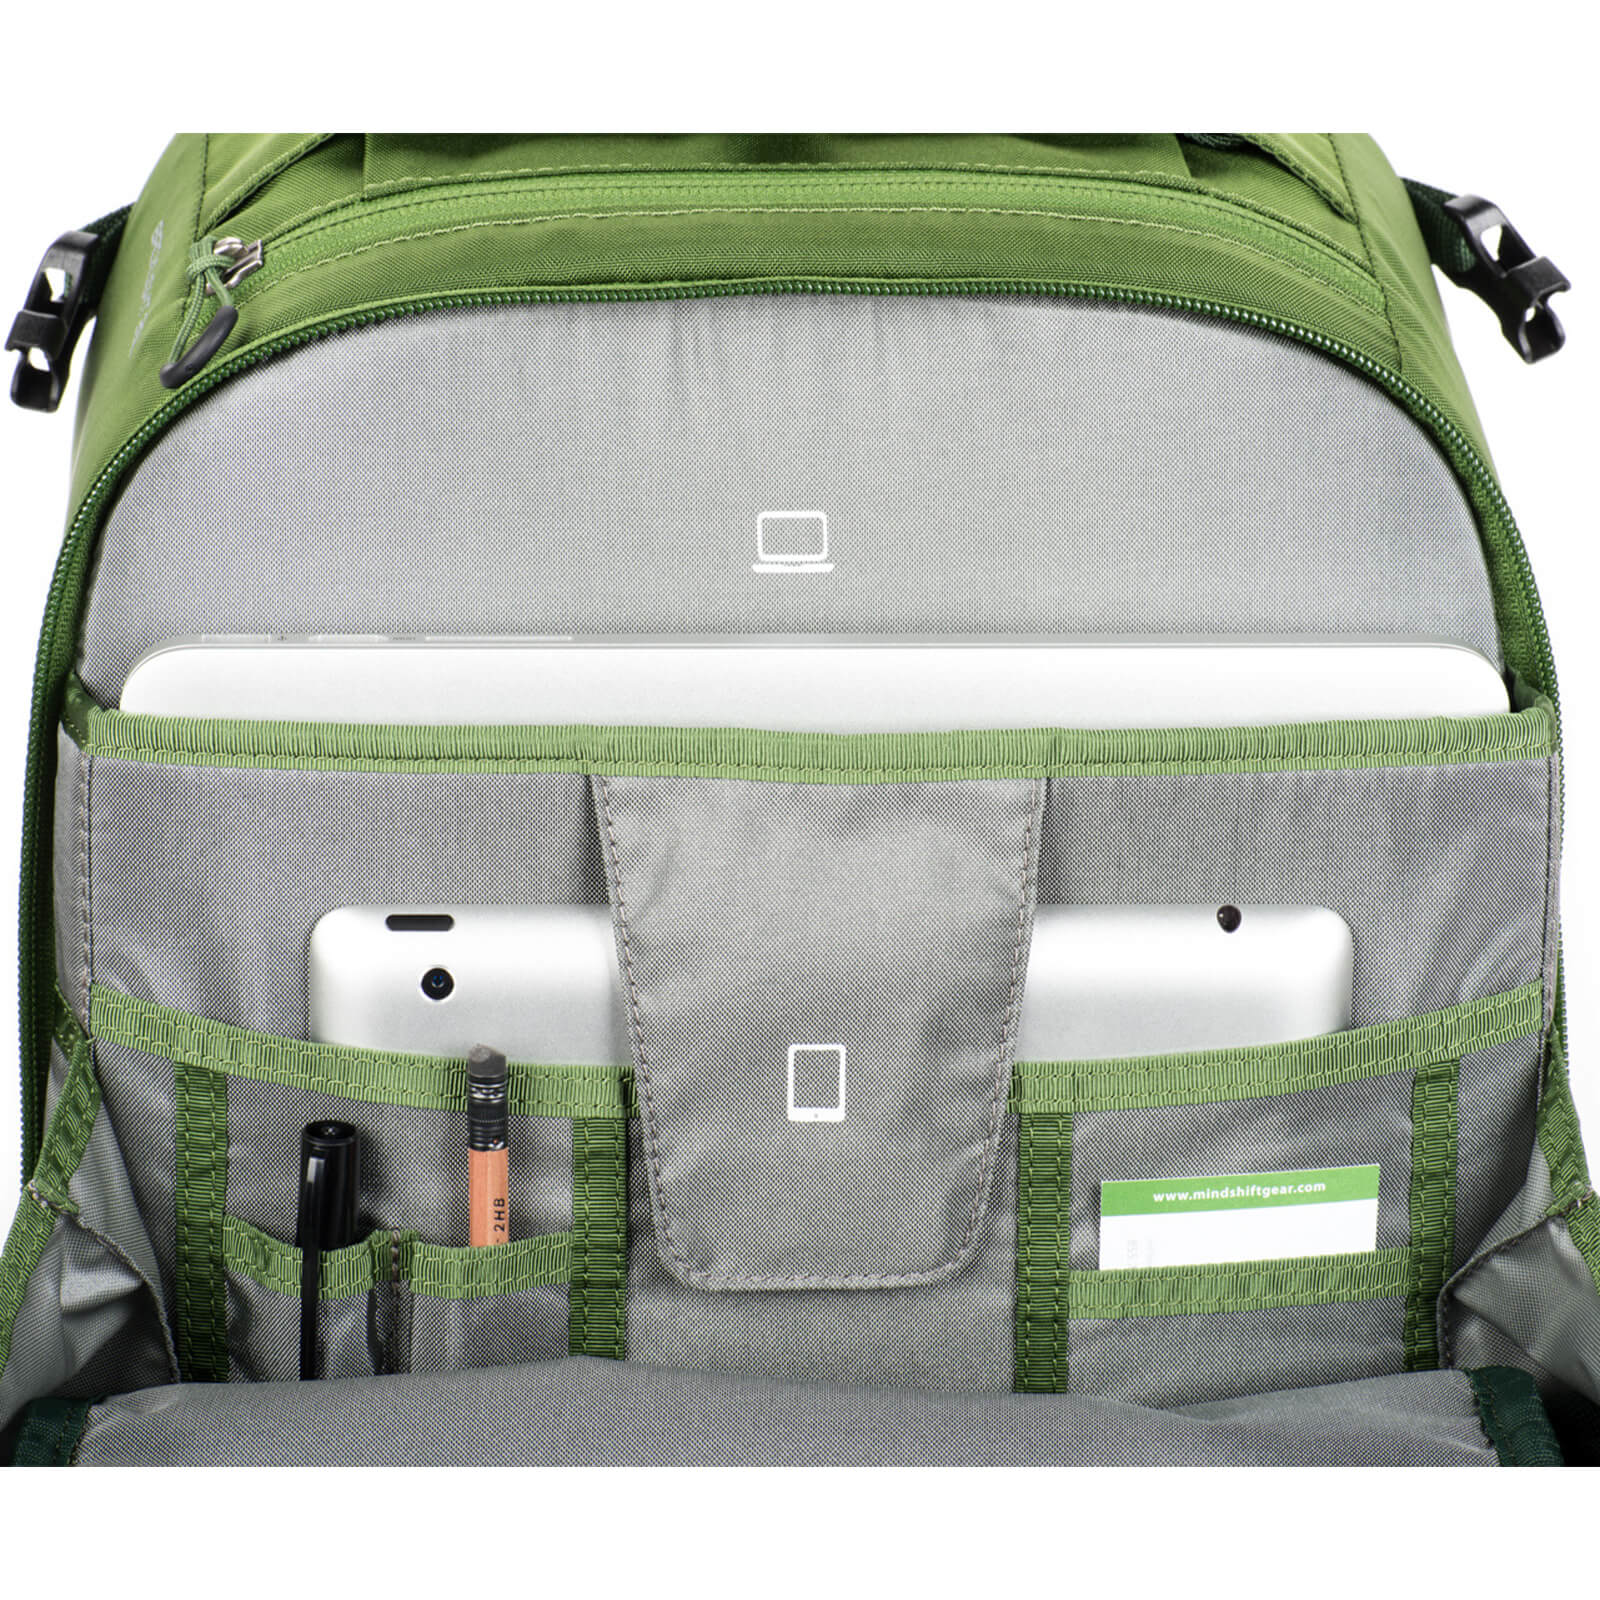 Dedicated compartments fit up to a 15” laptop and full size tablet